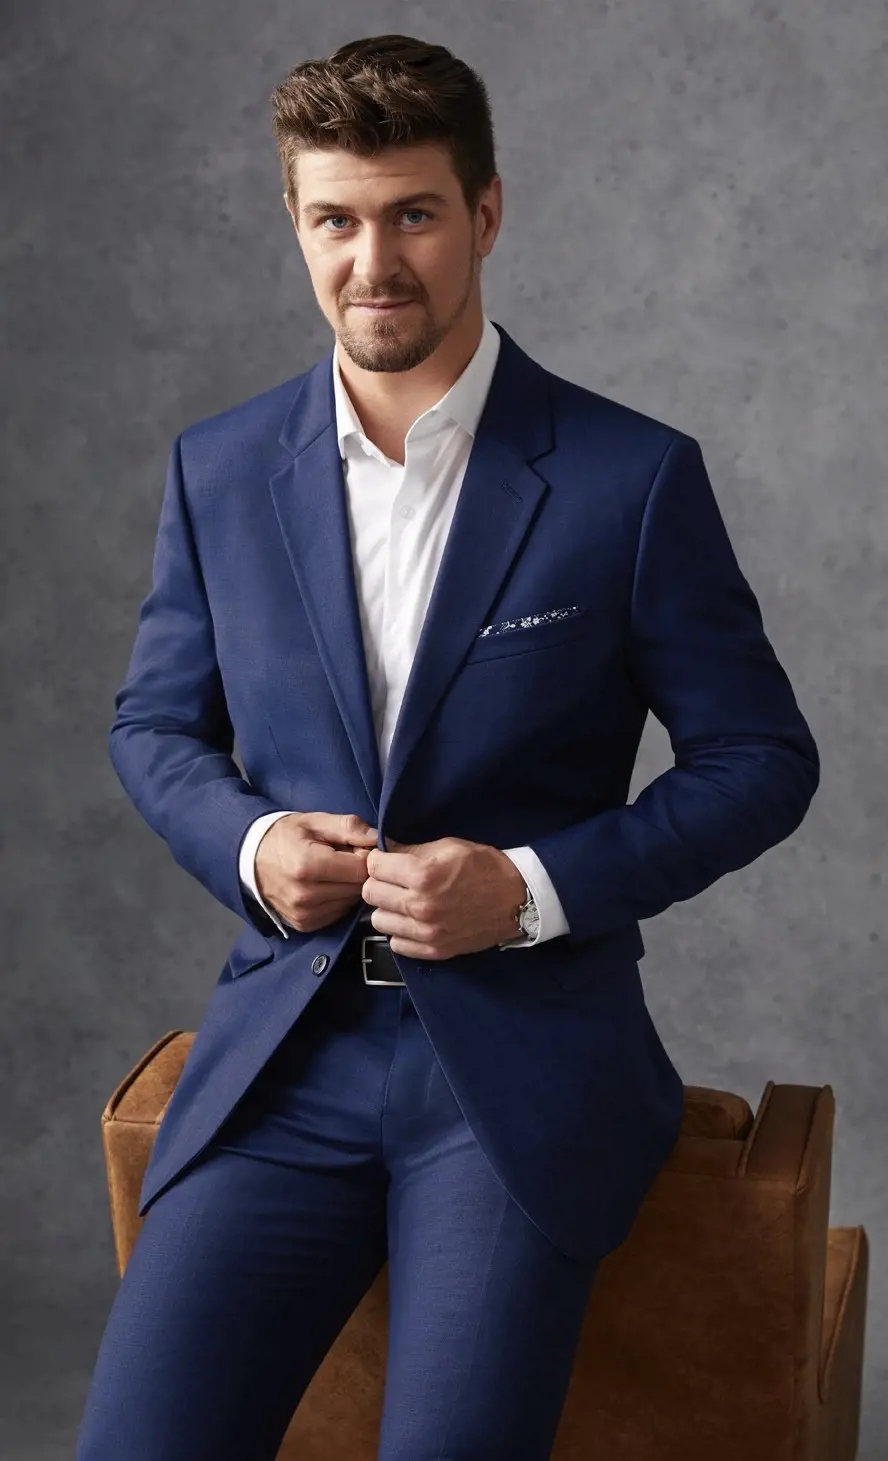 Mark Scheifele wearing a typical blue suit on October 2018